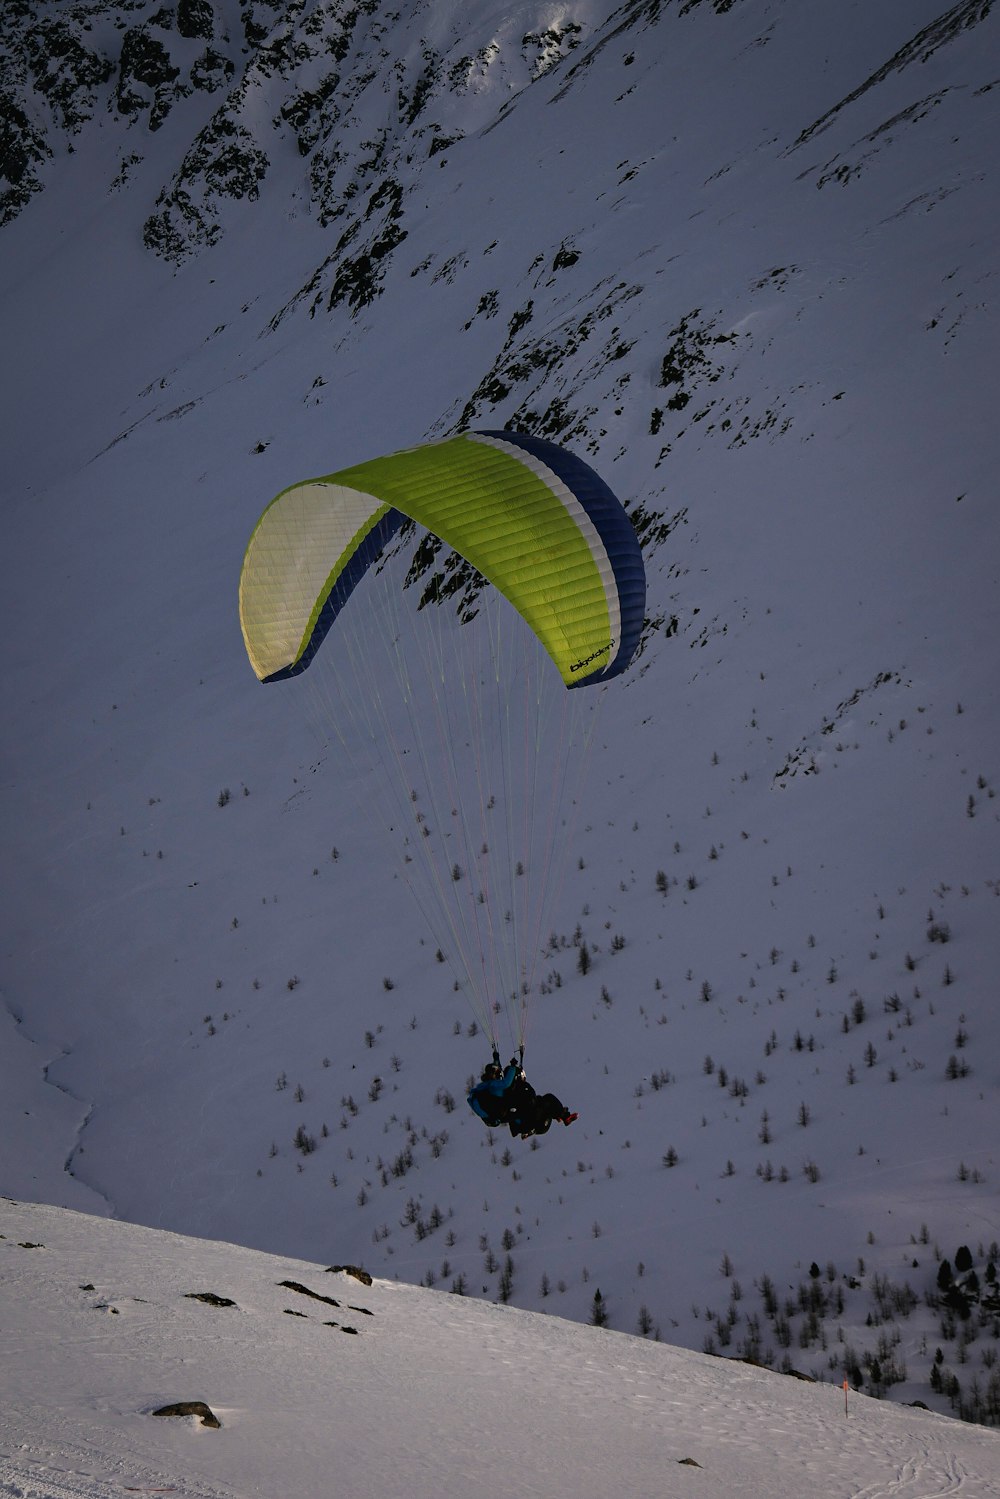 person in black jacket and black pants riding green parachute